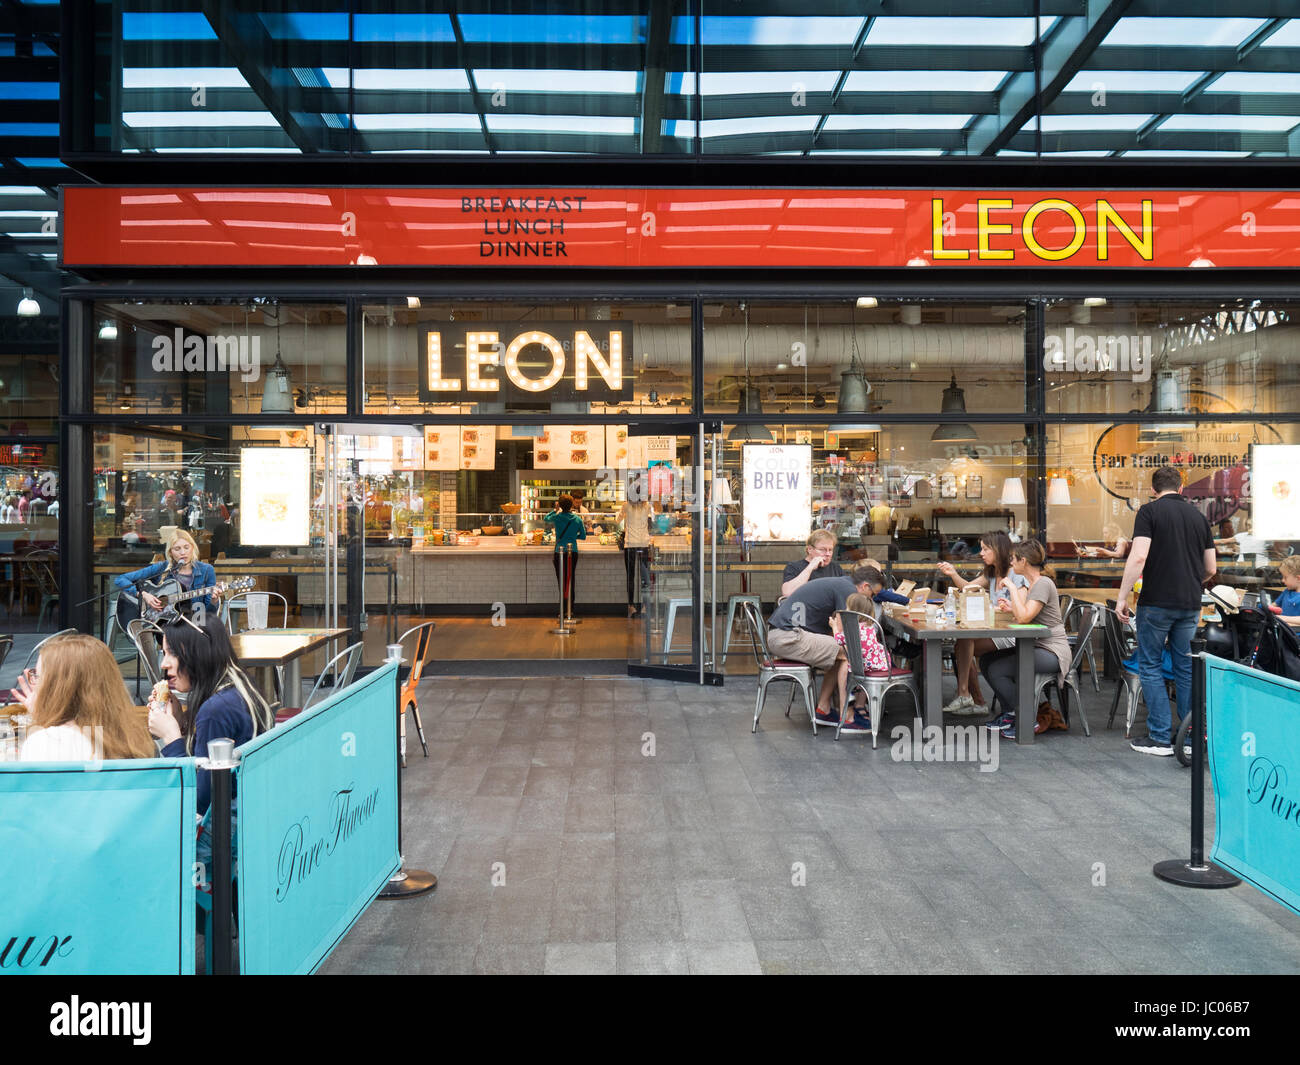 The Leon healthy & wholesome fast food restaurant in London's Spitalfields Market development in the City of London. Stock Photo